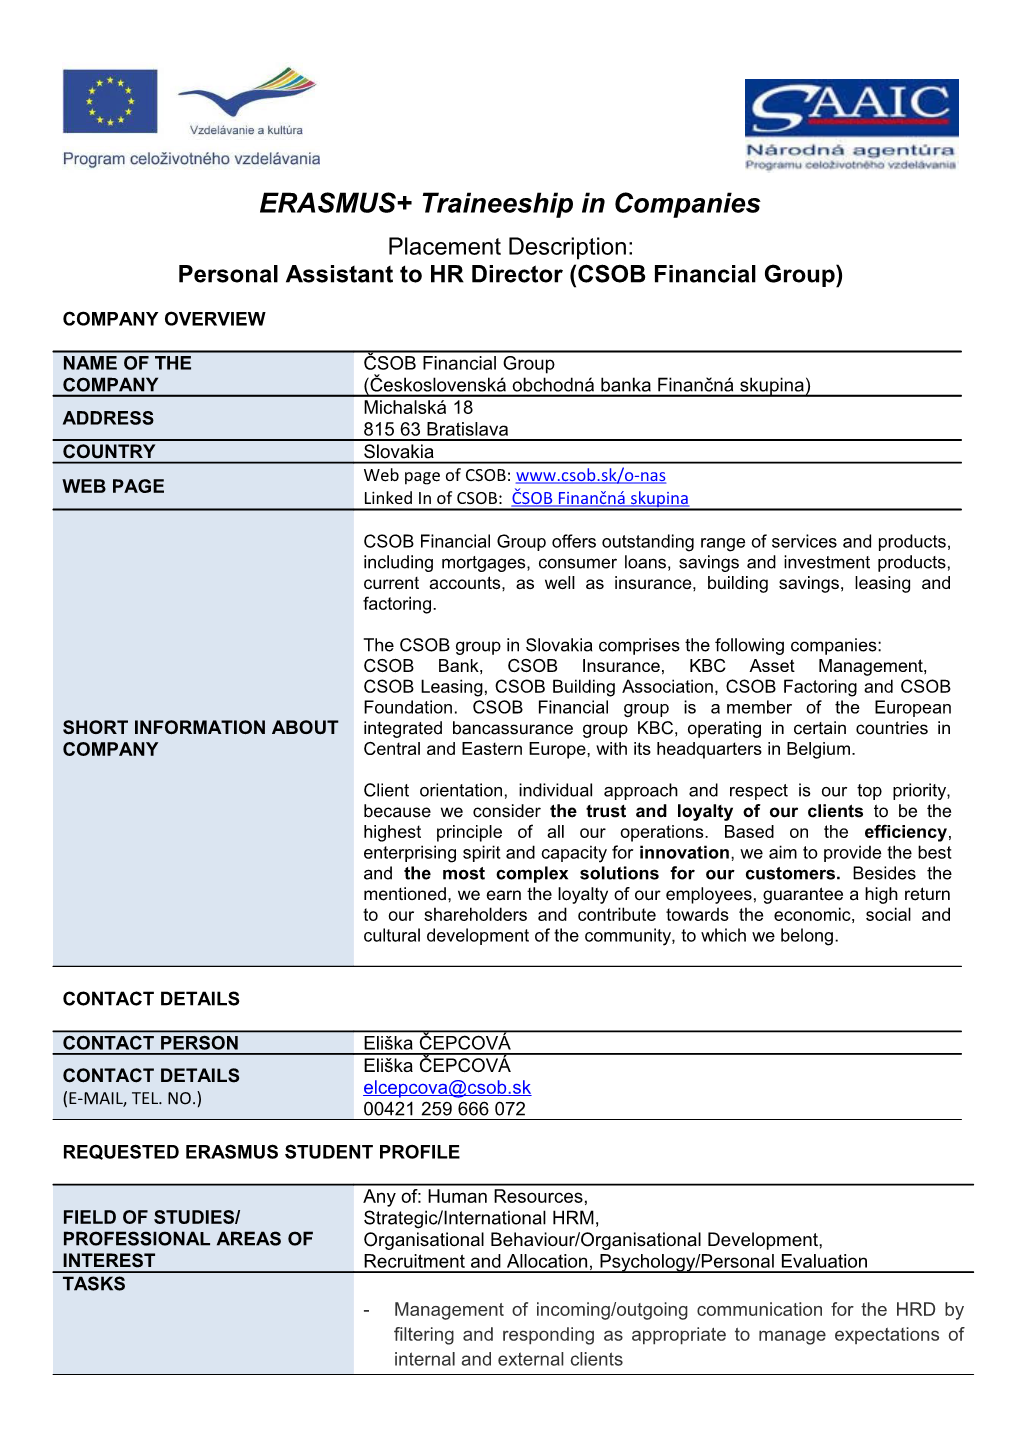 Personal Assistant to HR Director (CSOB Financial Group)